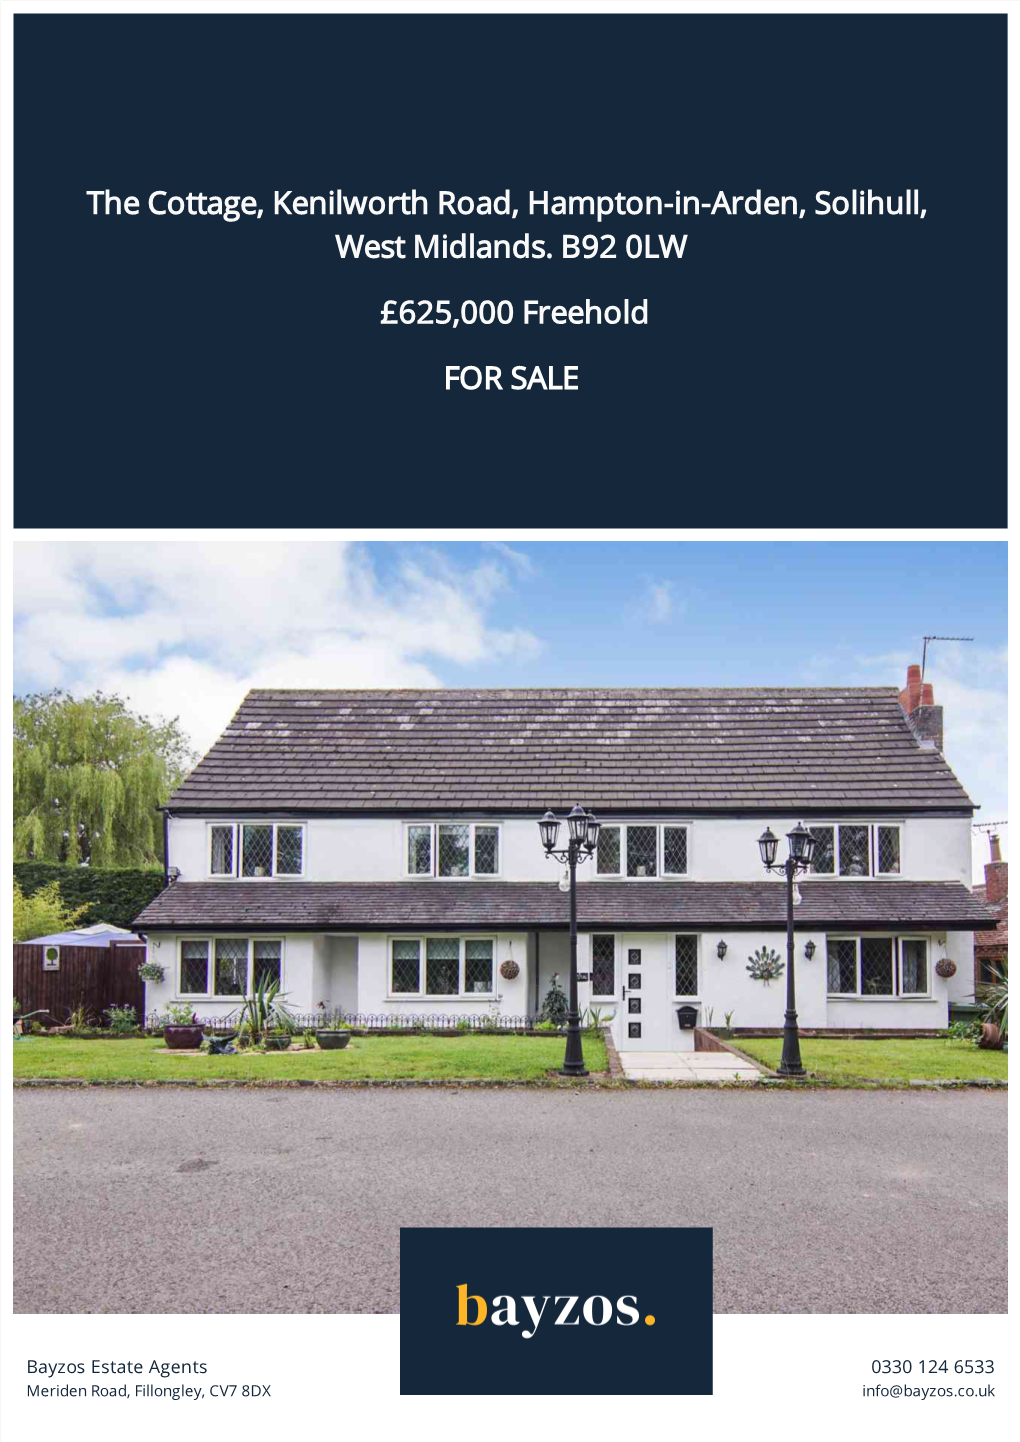 The Cottage, Kenilworth Road, Hampton-In-Arden, Solihull, West Midlands